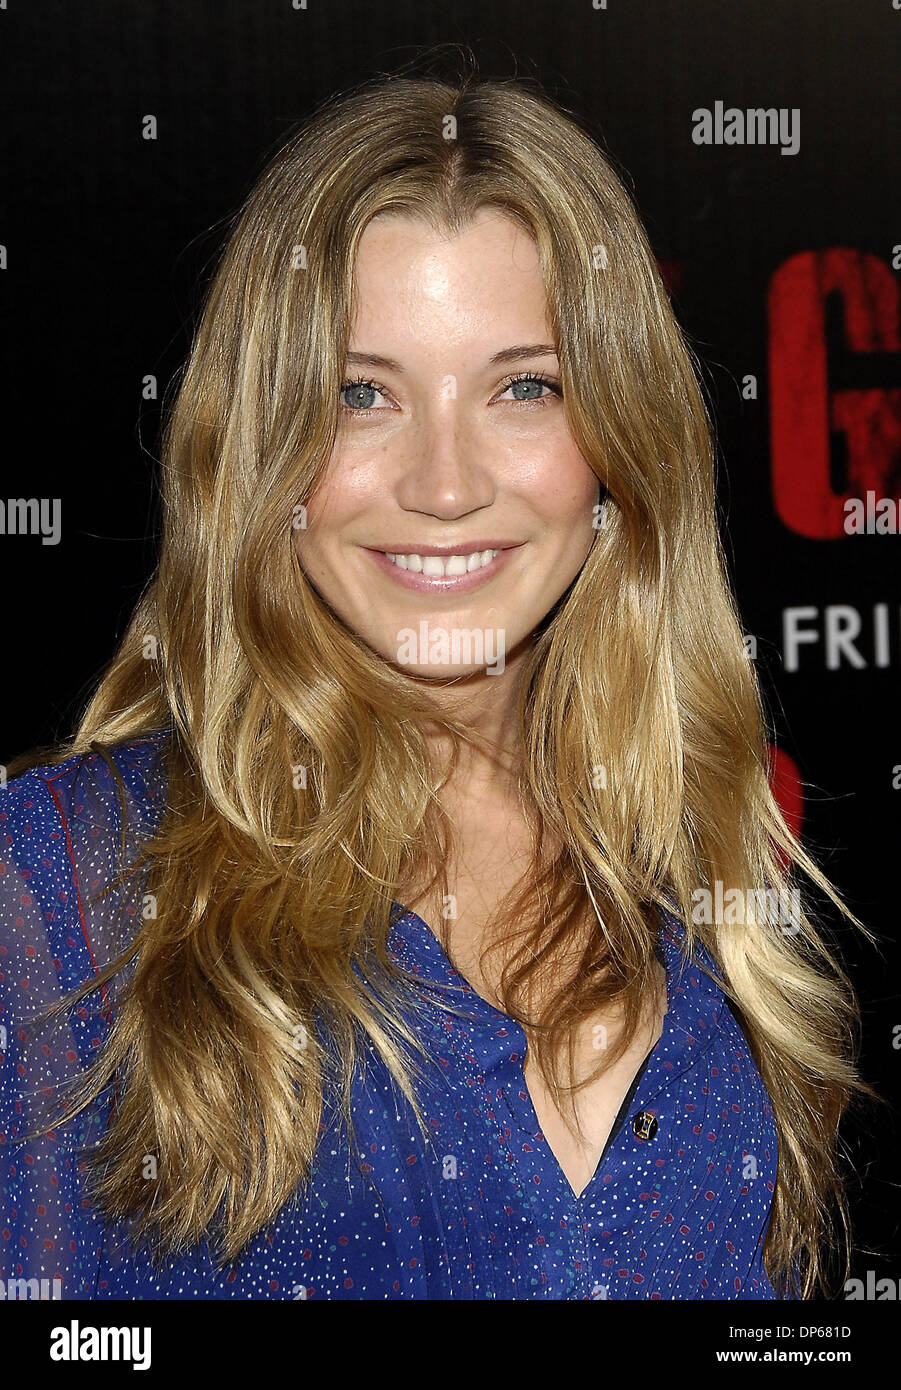 October 8, 2006; Buena Park, CA, USA; Actress SARAH ROEMER at the premiere of'The Grudge 2' at Knotts Scary Farm. Mandatory Credit: Photo by Vaughn Youtz/ZUMA Press. (©) Copyright 2006 by Vaughn Youtz Stock Photo